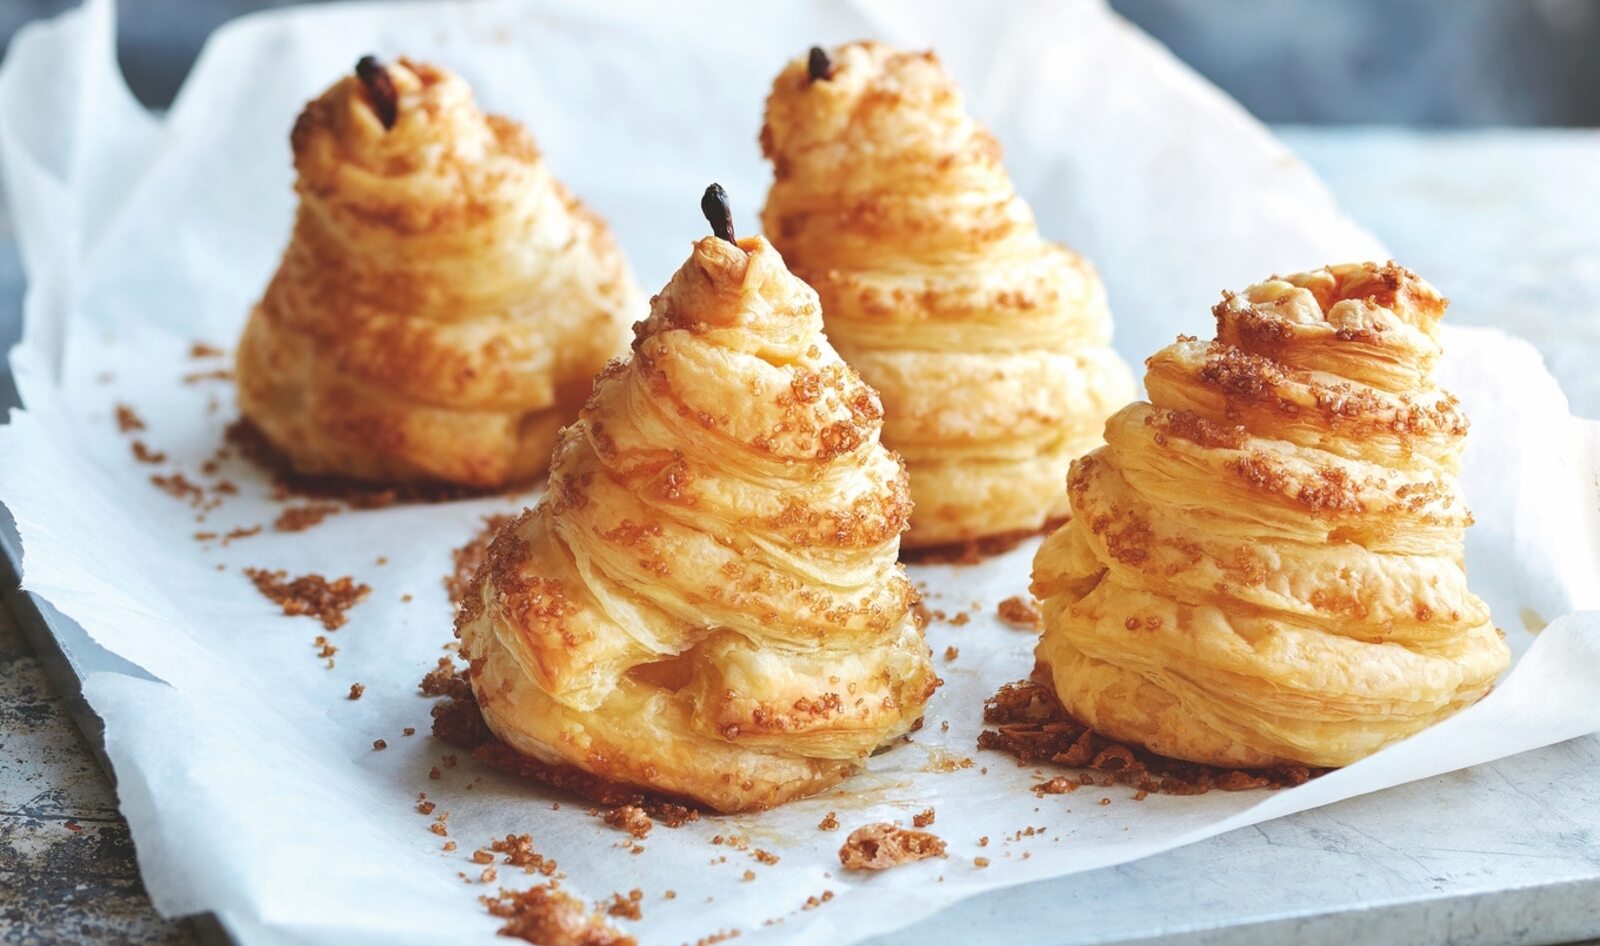 10 Ways to Use Puff Pastry: From Croissants to Pizza